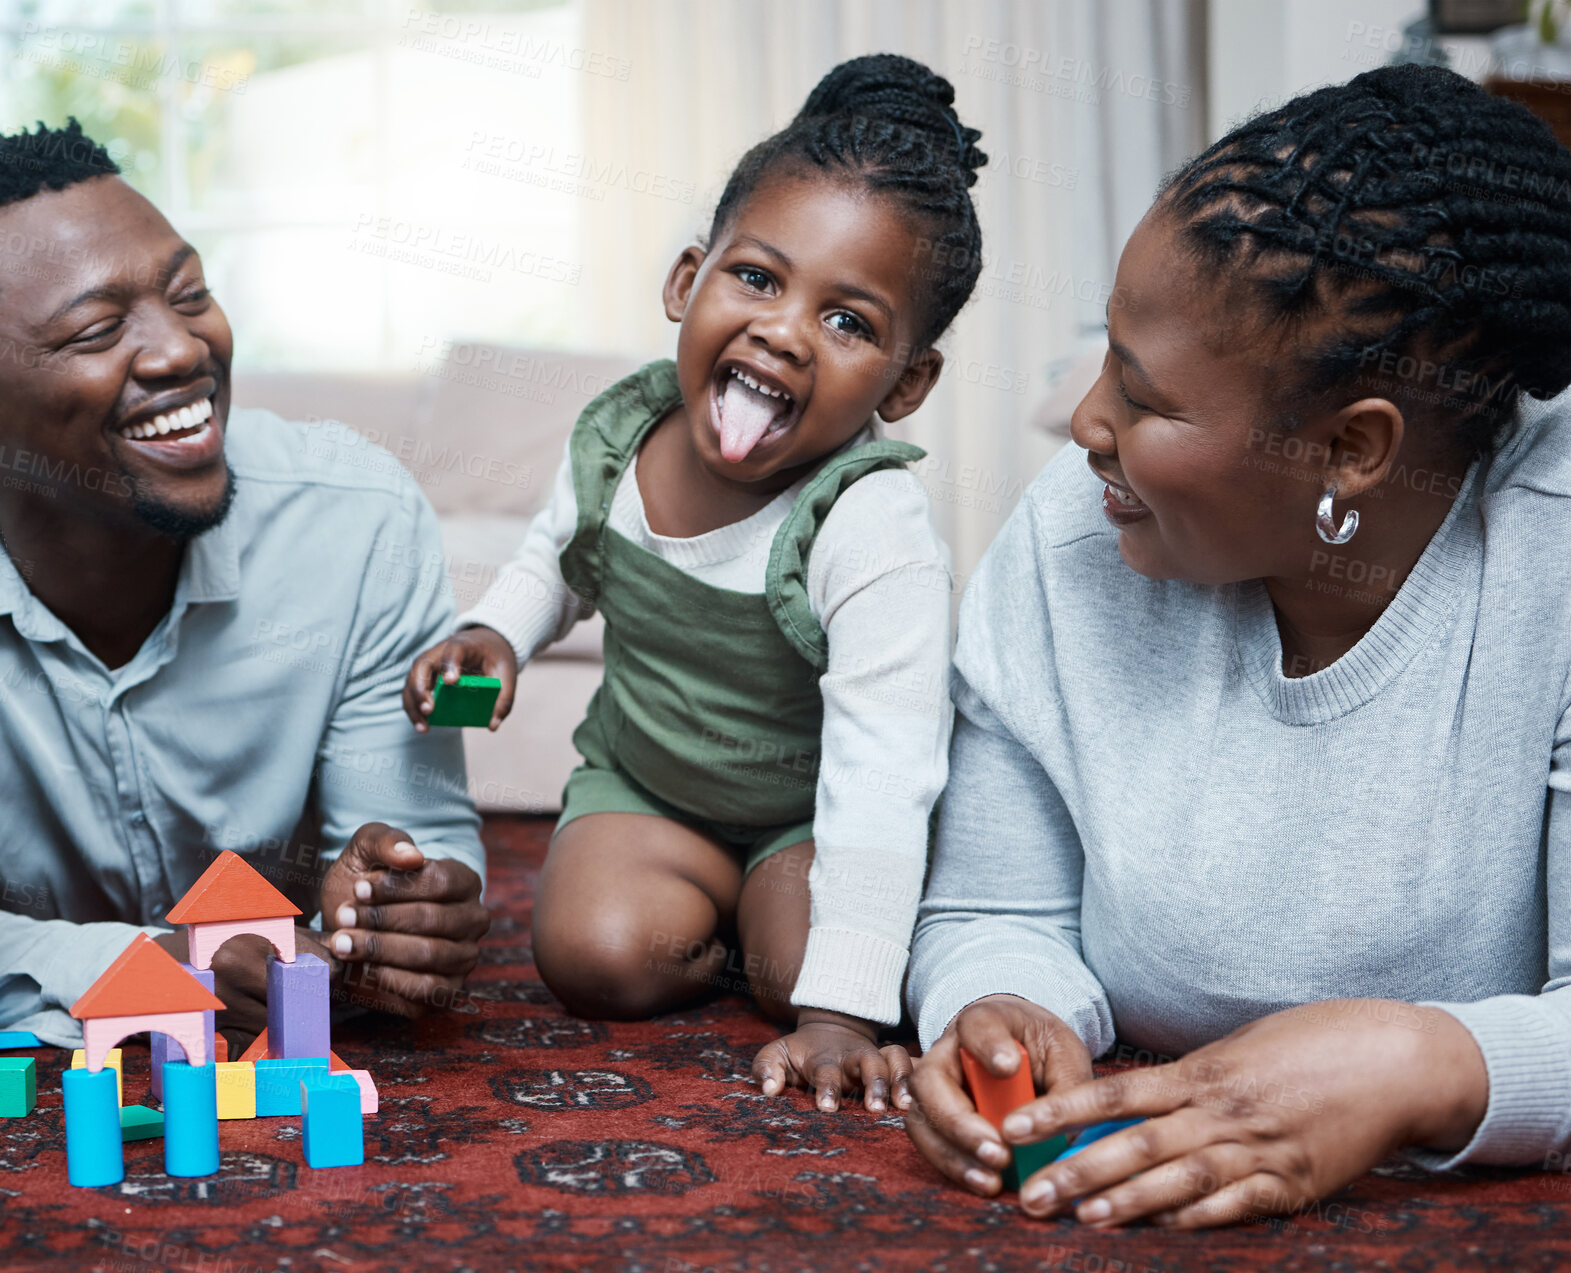 Buy stock photo Black family, portrait or girl with parents or building blocks for playing, creative fun or bonding in home. Love, mom or happy kid on floor with dad, games or toys for child development or learning